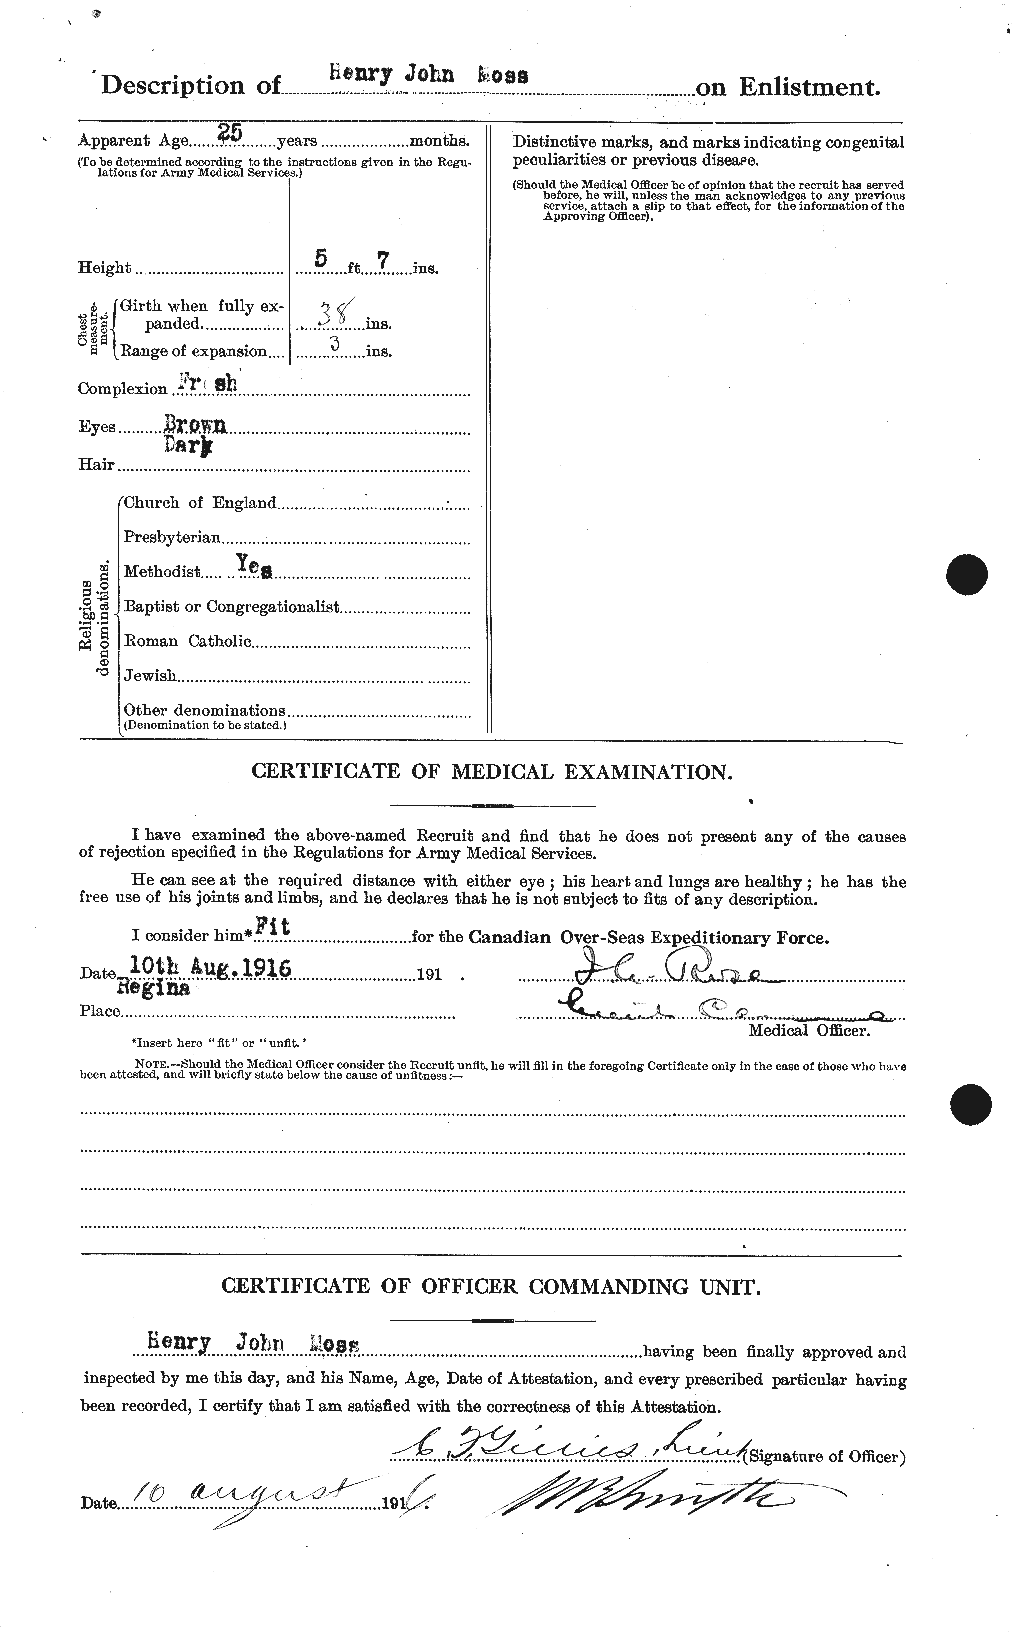 Personnel Records of the First World War - CEF 512008b